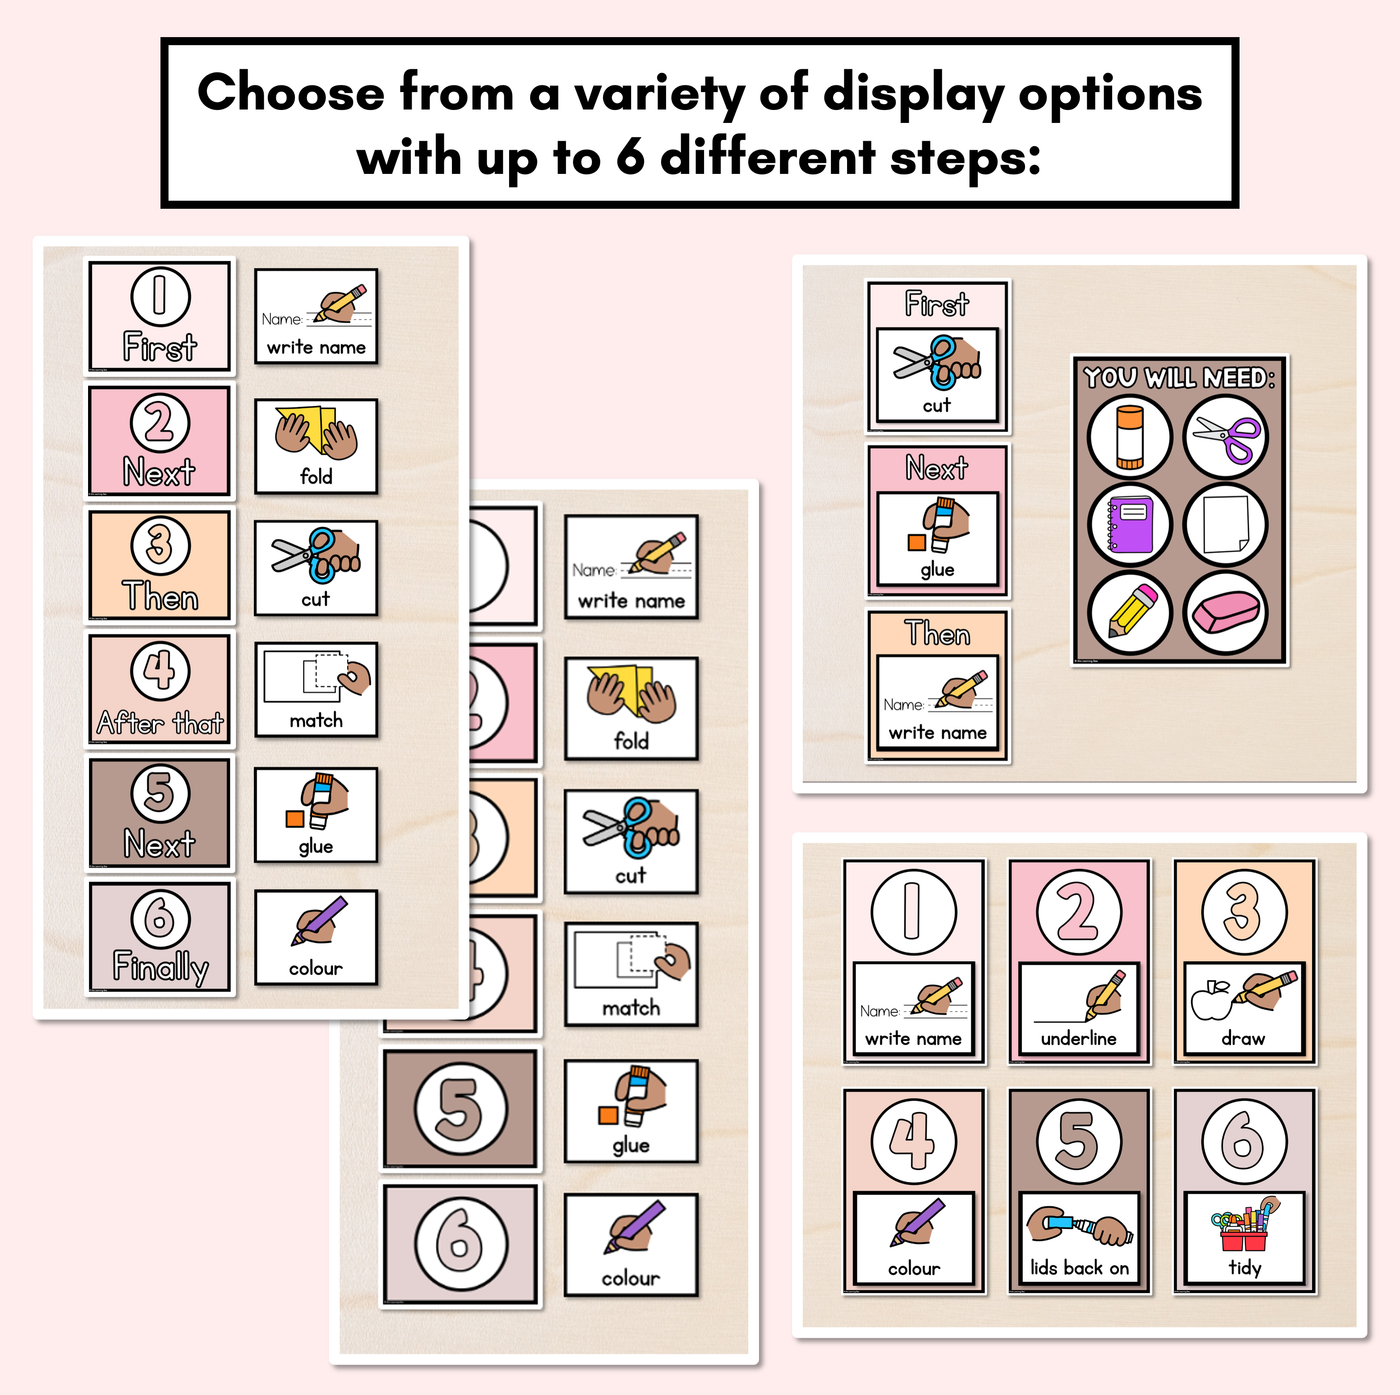 Instructional Icon Editable Templates - Classroom Instructions & Equipment Visuals - NEUTRAL PALETTE